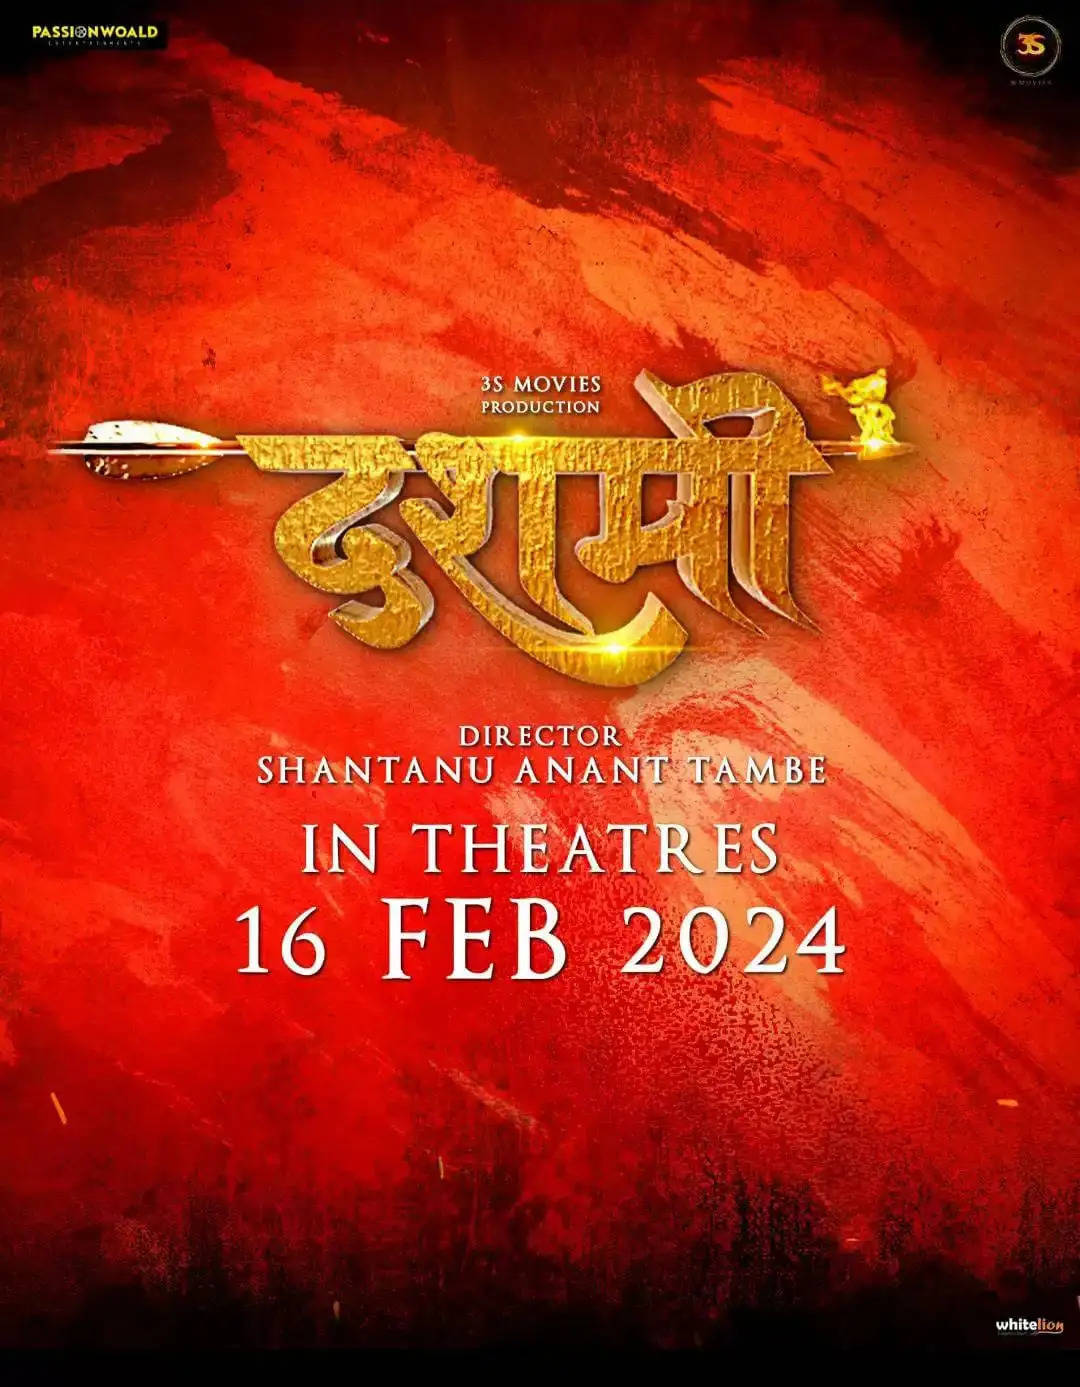 'Dashmi' Set to Make a Bold Statement: Receives UA Certificate, Release Date Confirmed for February 16th